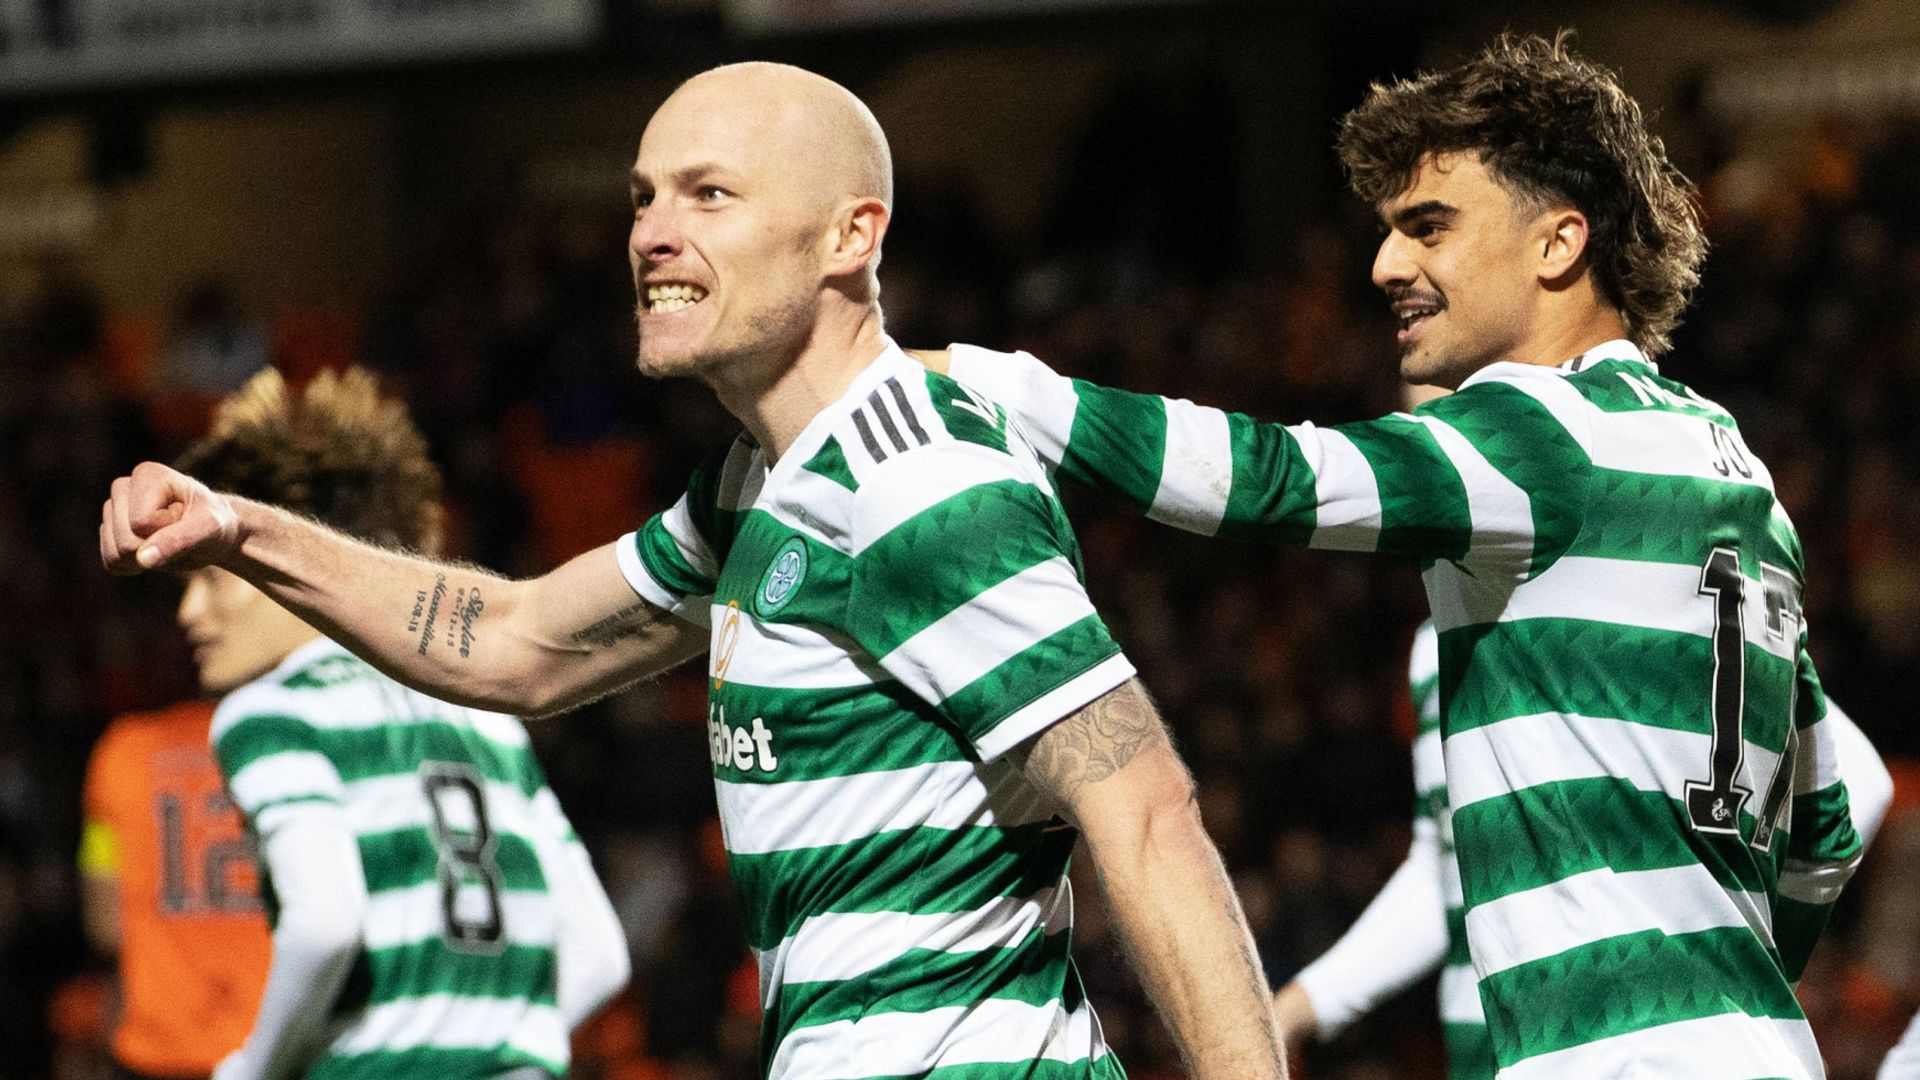 Celtic restore nine-point lead at top with win over Dundee Utd